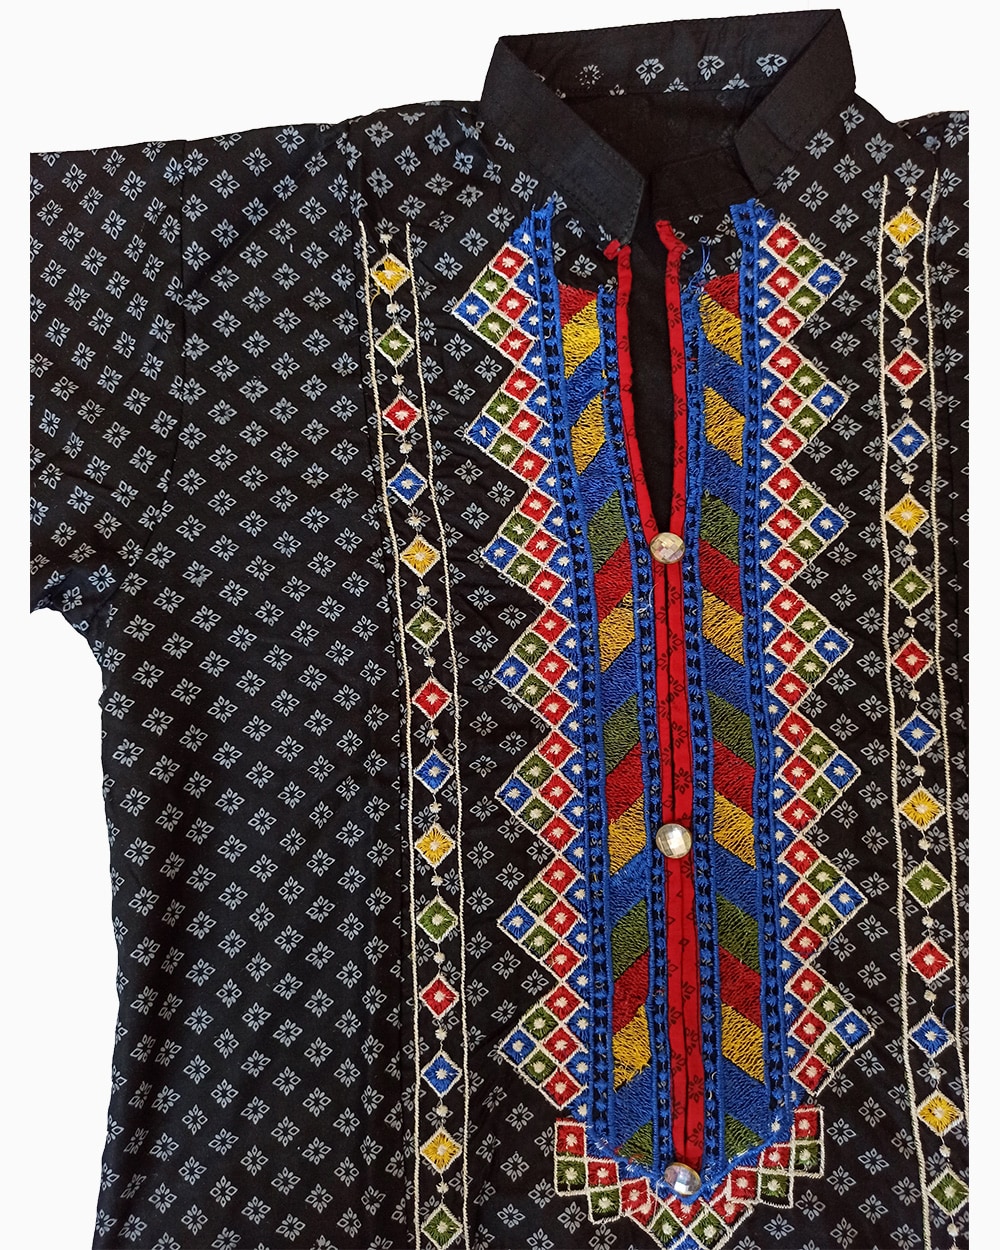 Balochi cultural embroidered shirt-all over embroidered shirt-buy cultural fashion online-black self printed contrast embroidered (6)